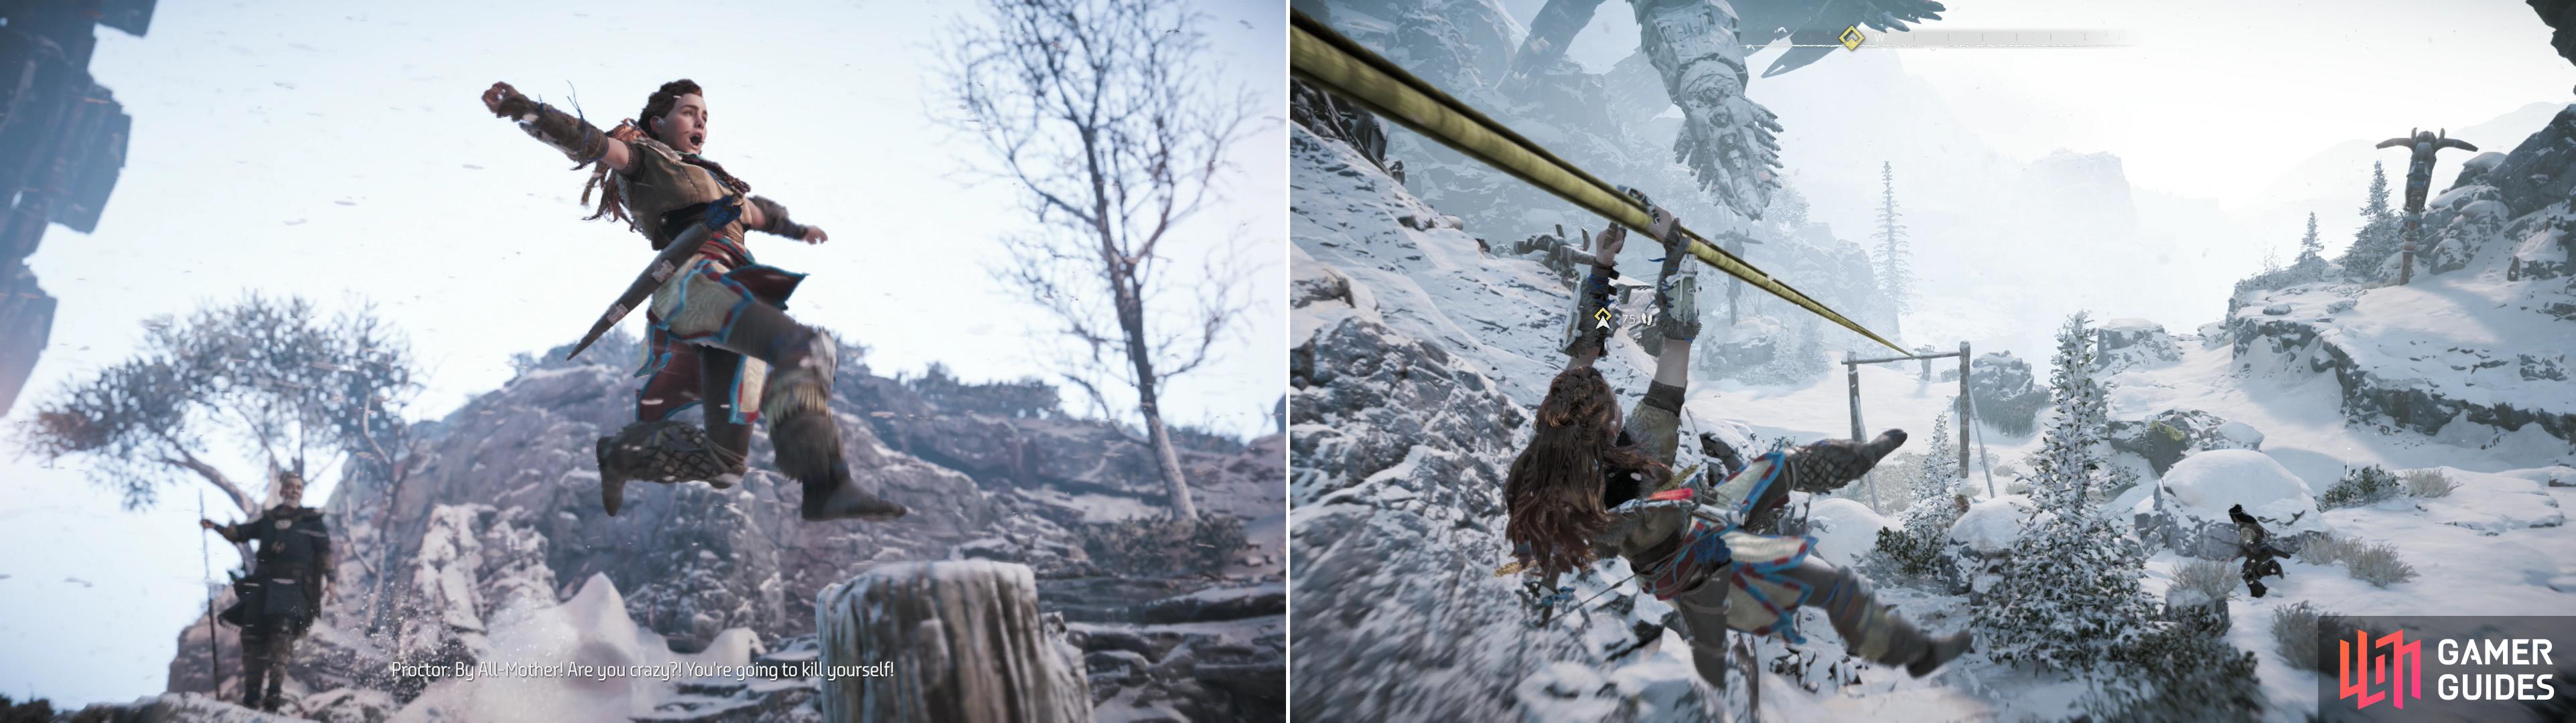 Facing impeding defeat, Aloy takes an unconventional route through the Proving (left). Braving dangerous conditions, use the alternative path to take the lead (right).